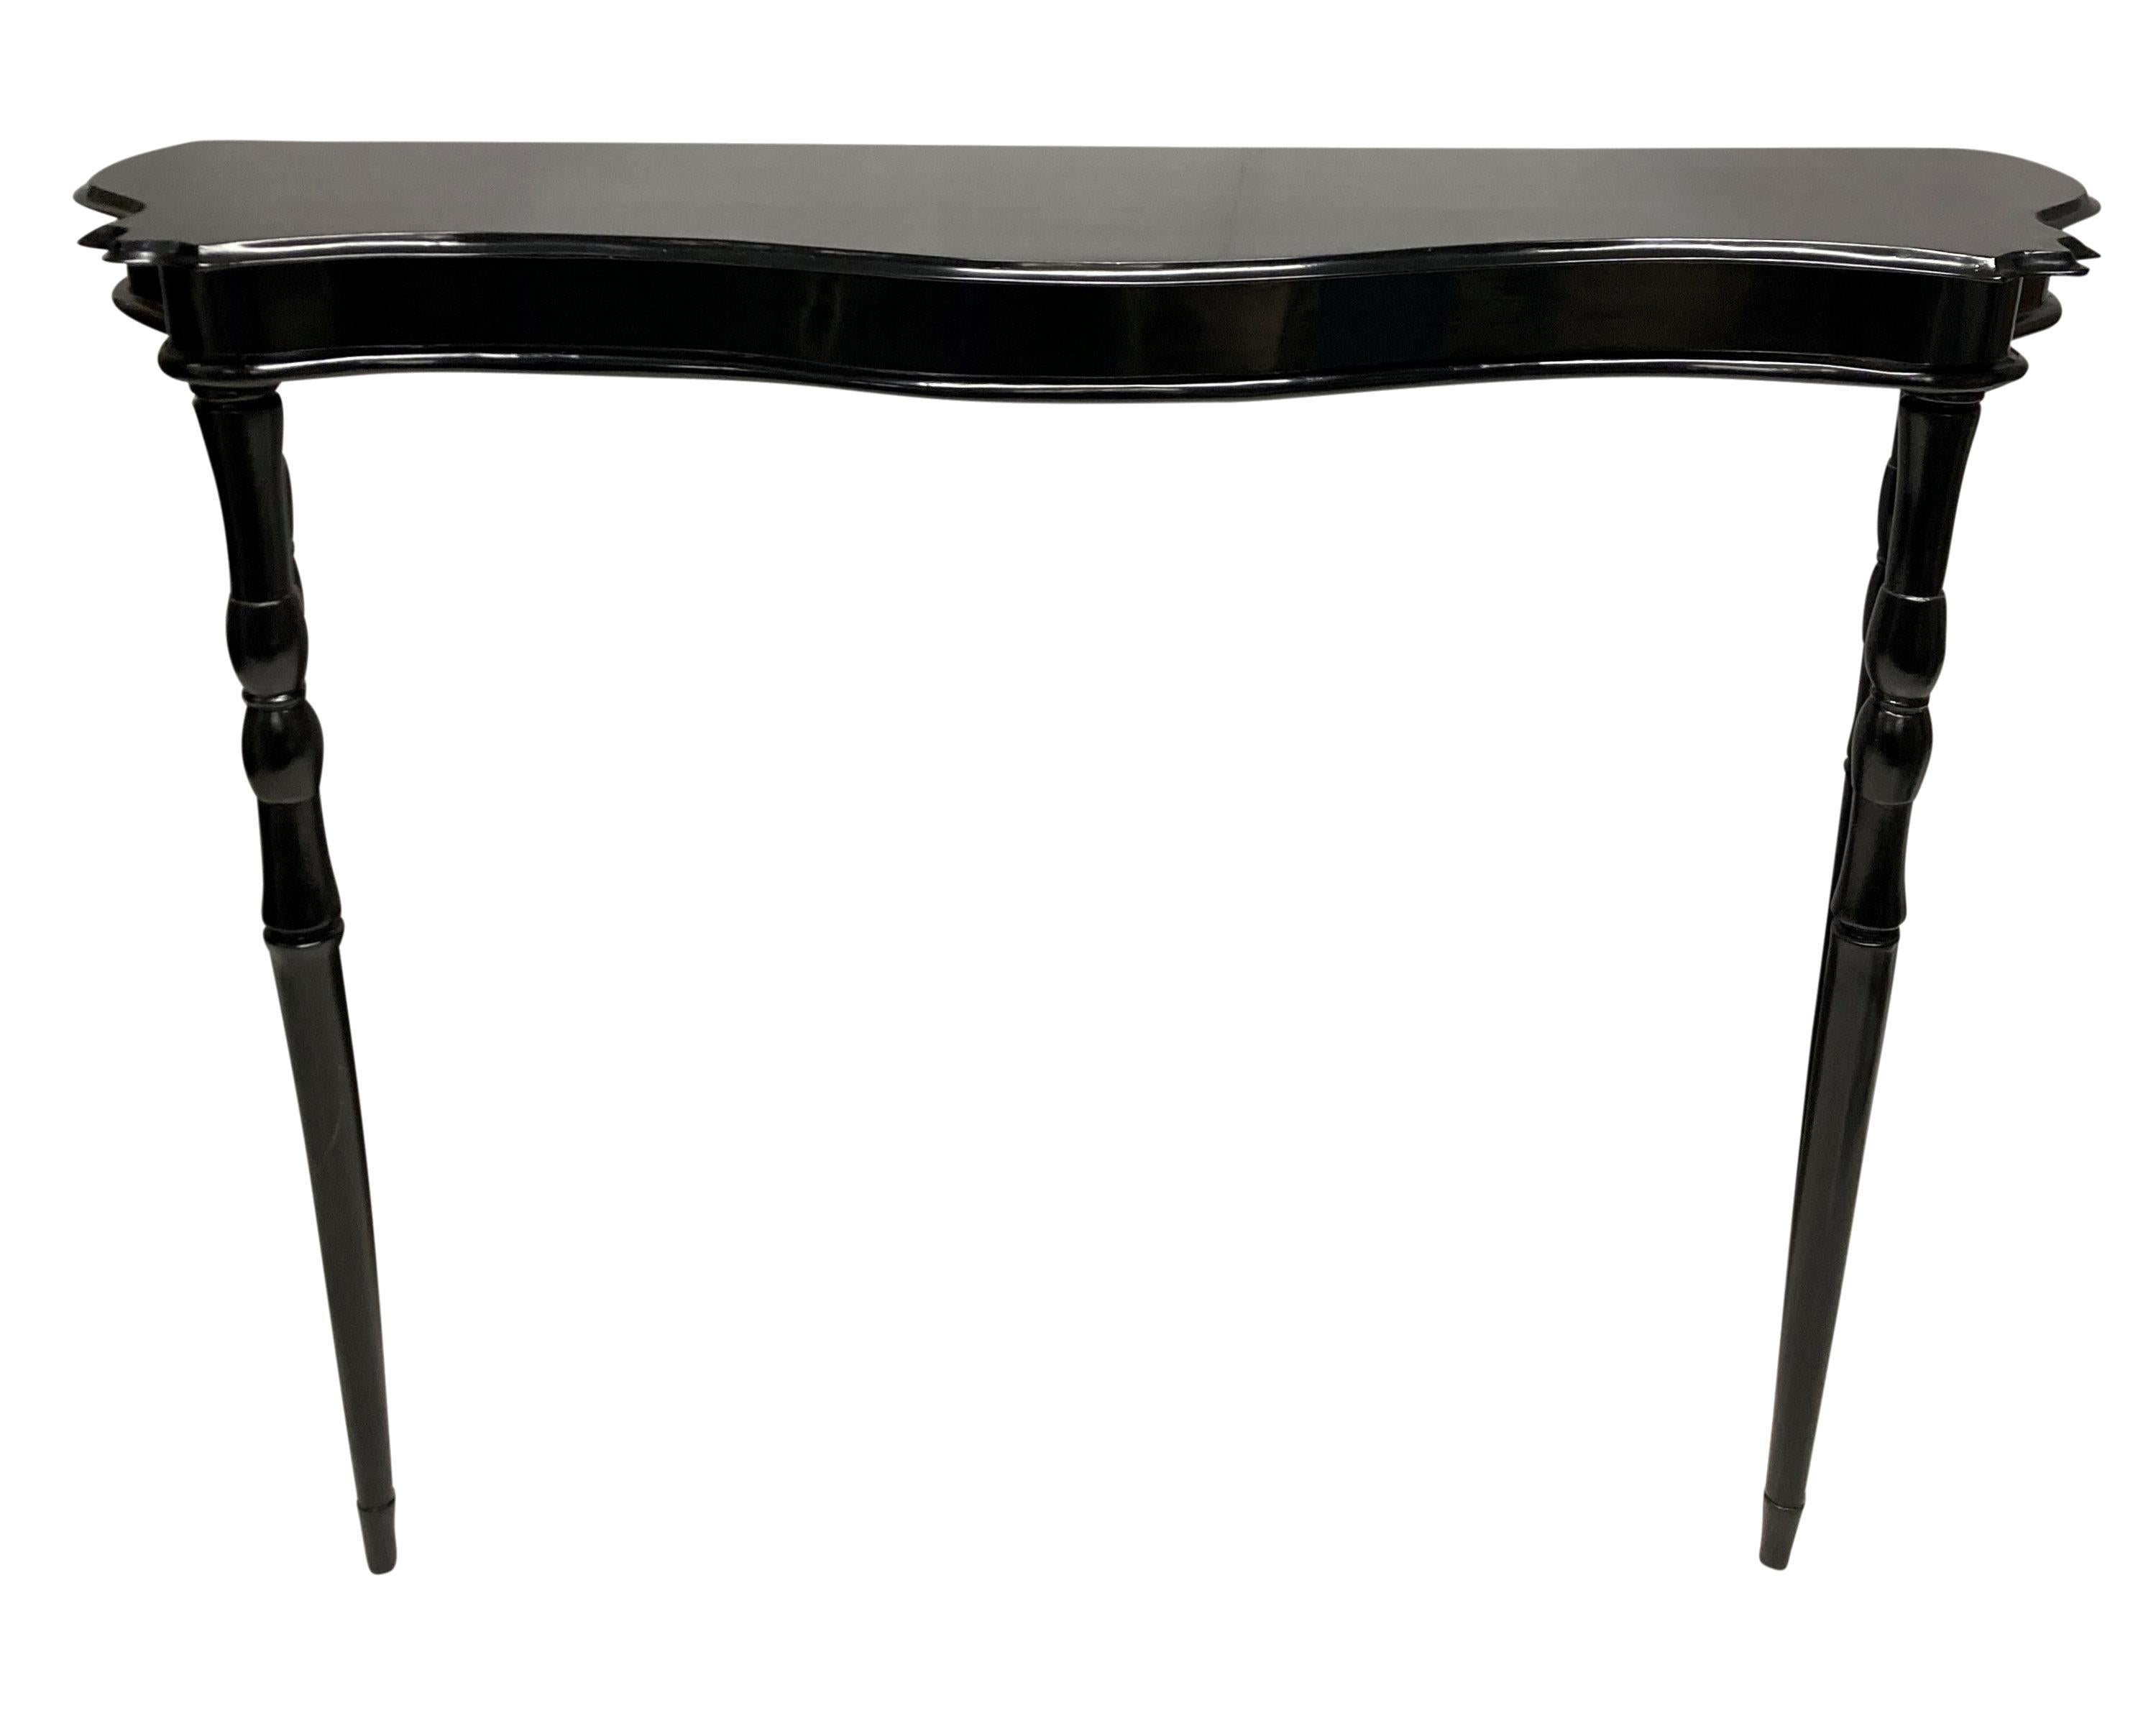 An elegant Italian black lacquered console table with serpentine front and on four tapering legs.